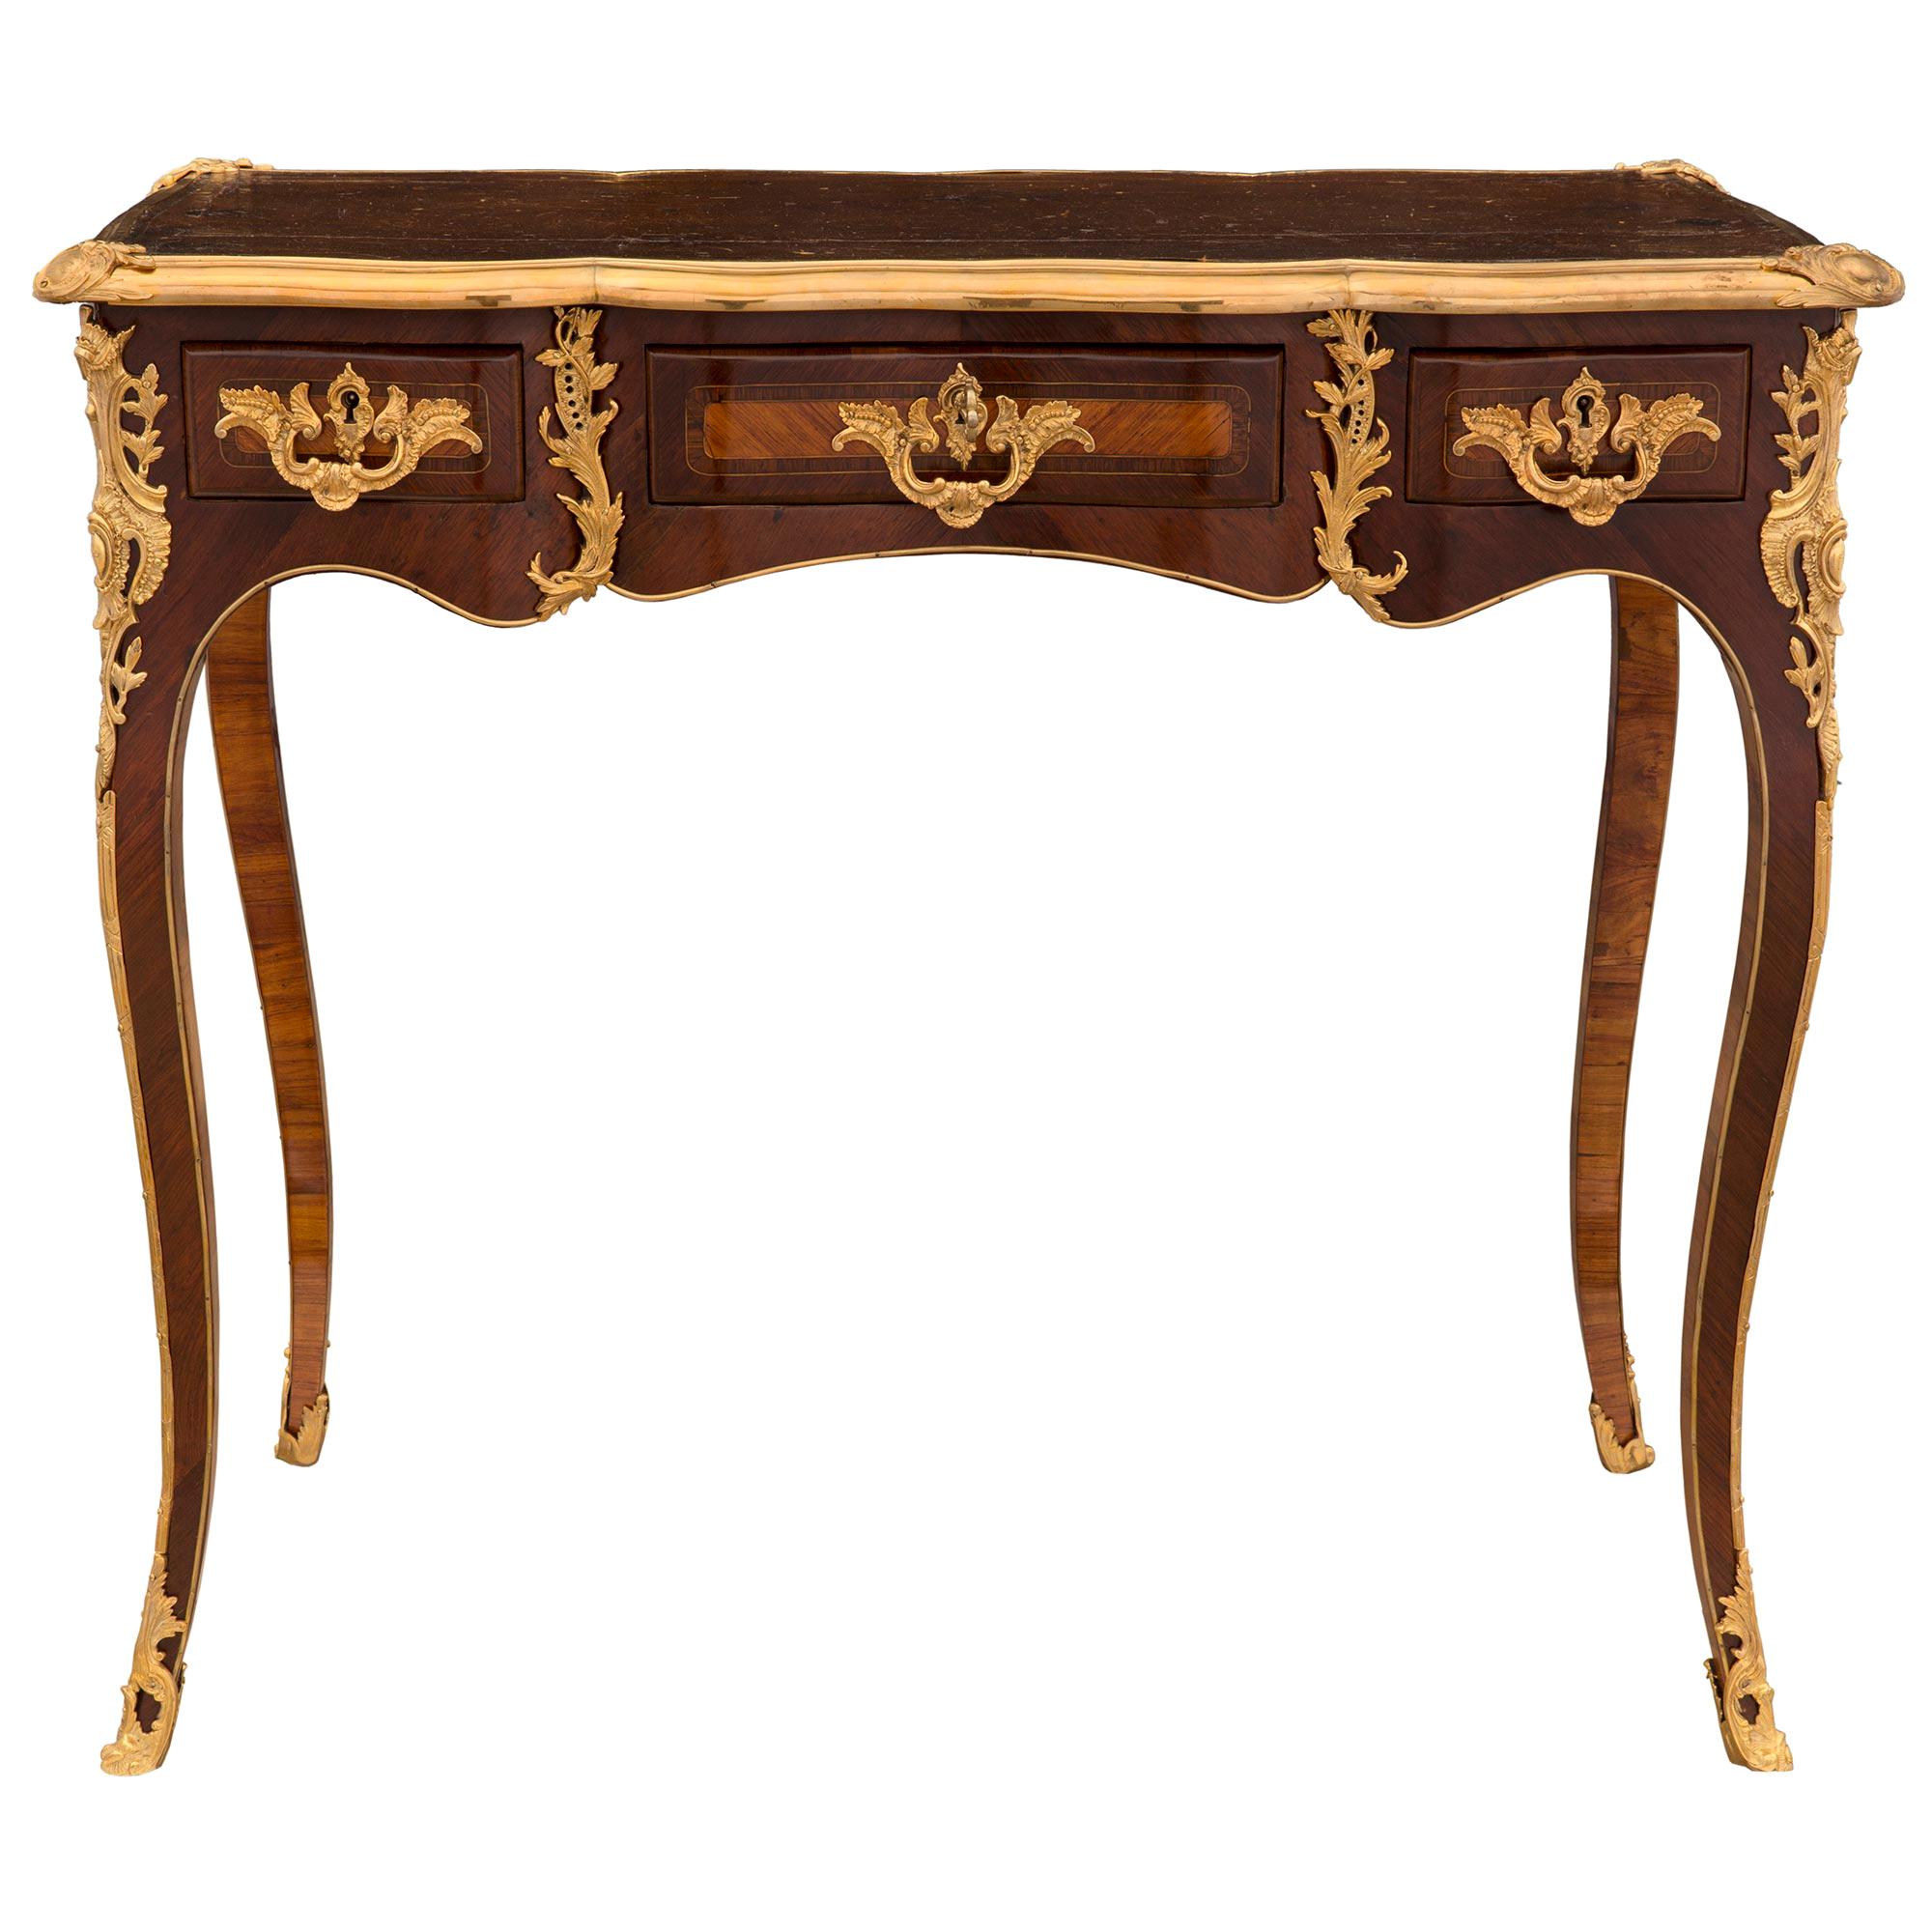 French 18th Century Louis XV Period French Desk in Kingwood and Tulipwood For Sale